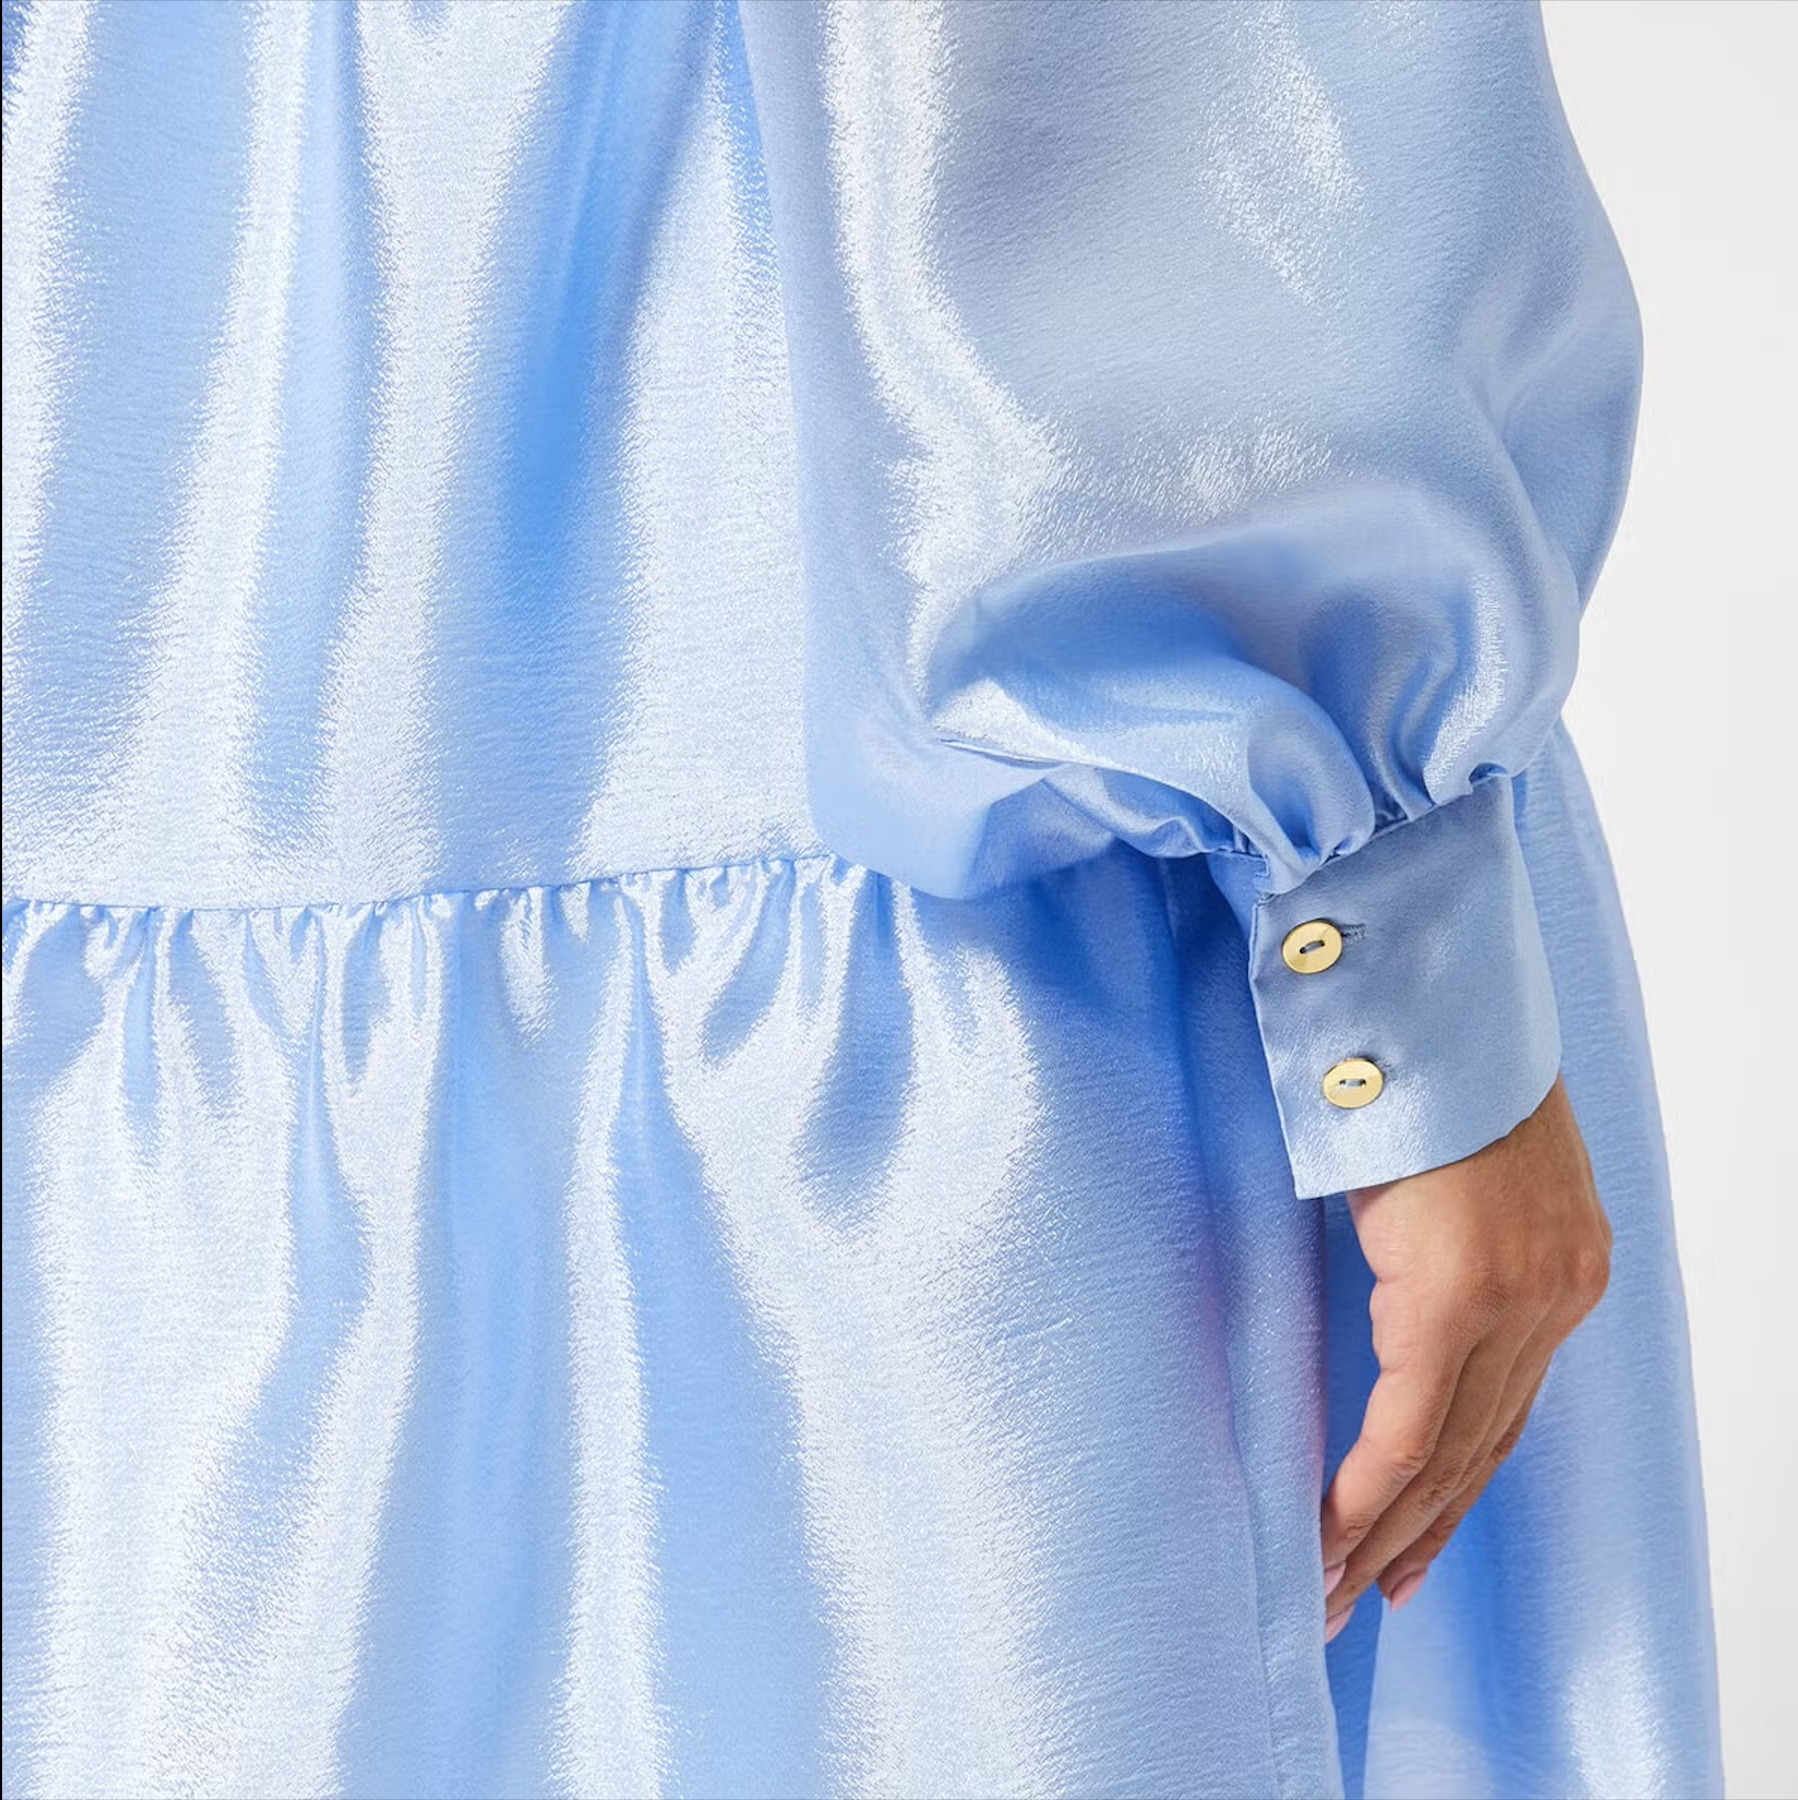 Stine Goya Jasmine Tiered Long-sleeve Shift Dress in Light Blue, available for rent. Features tiered layers and long sleeves in a soft light blue.